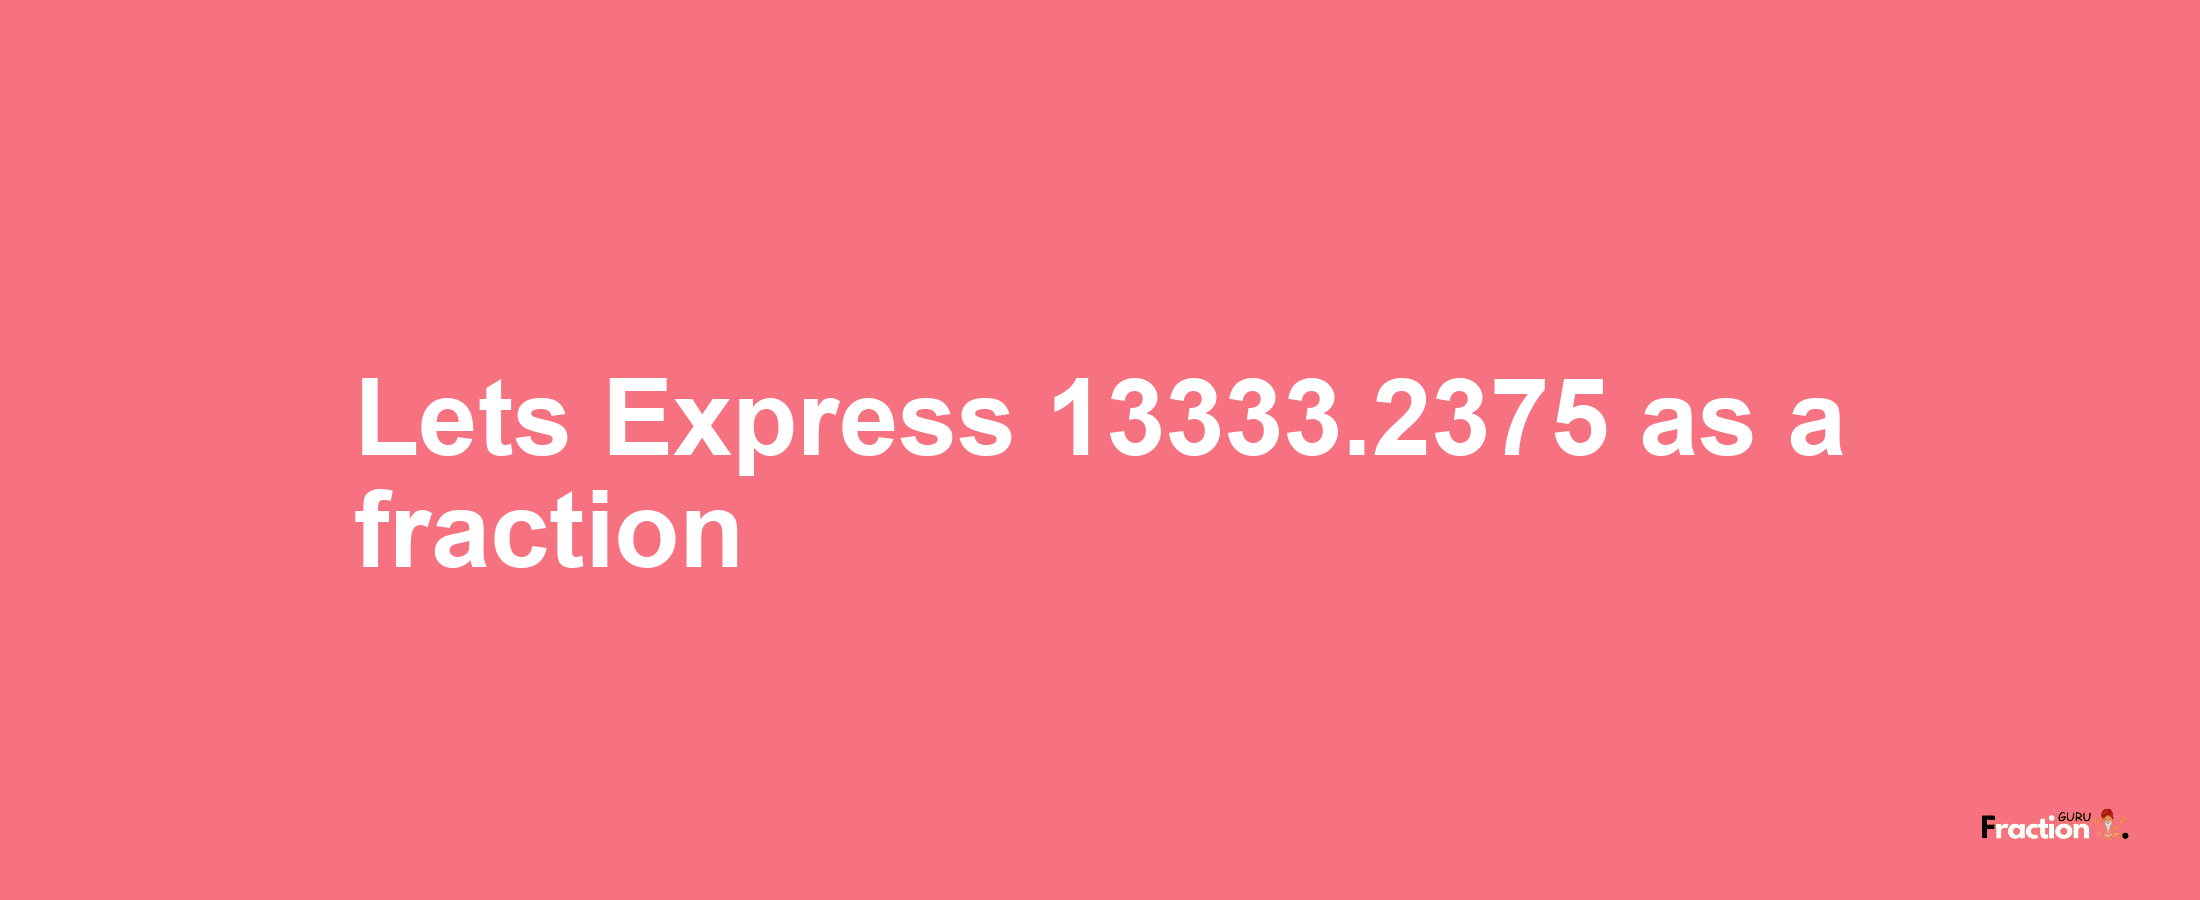 Lets Express 13333.2375 as afraction